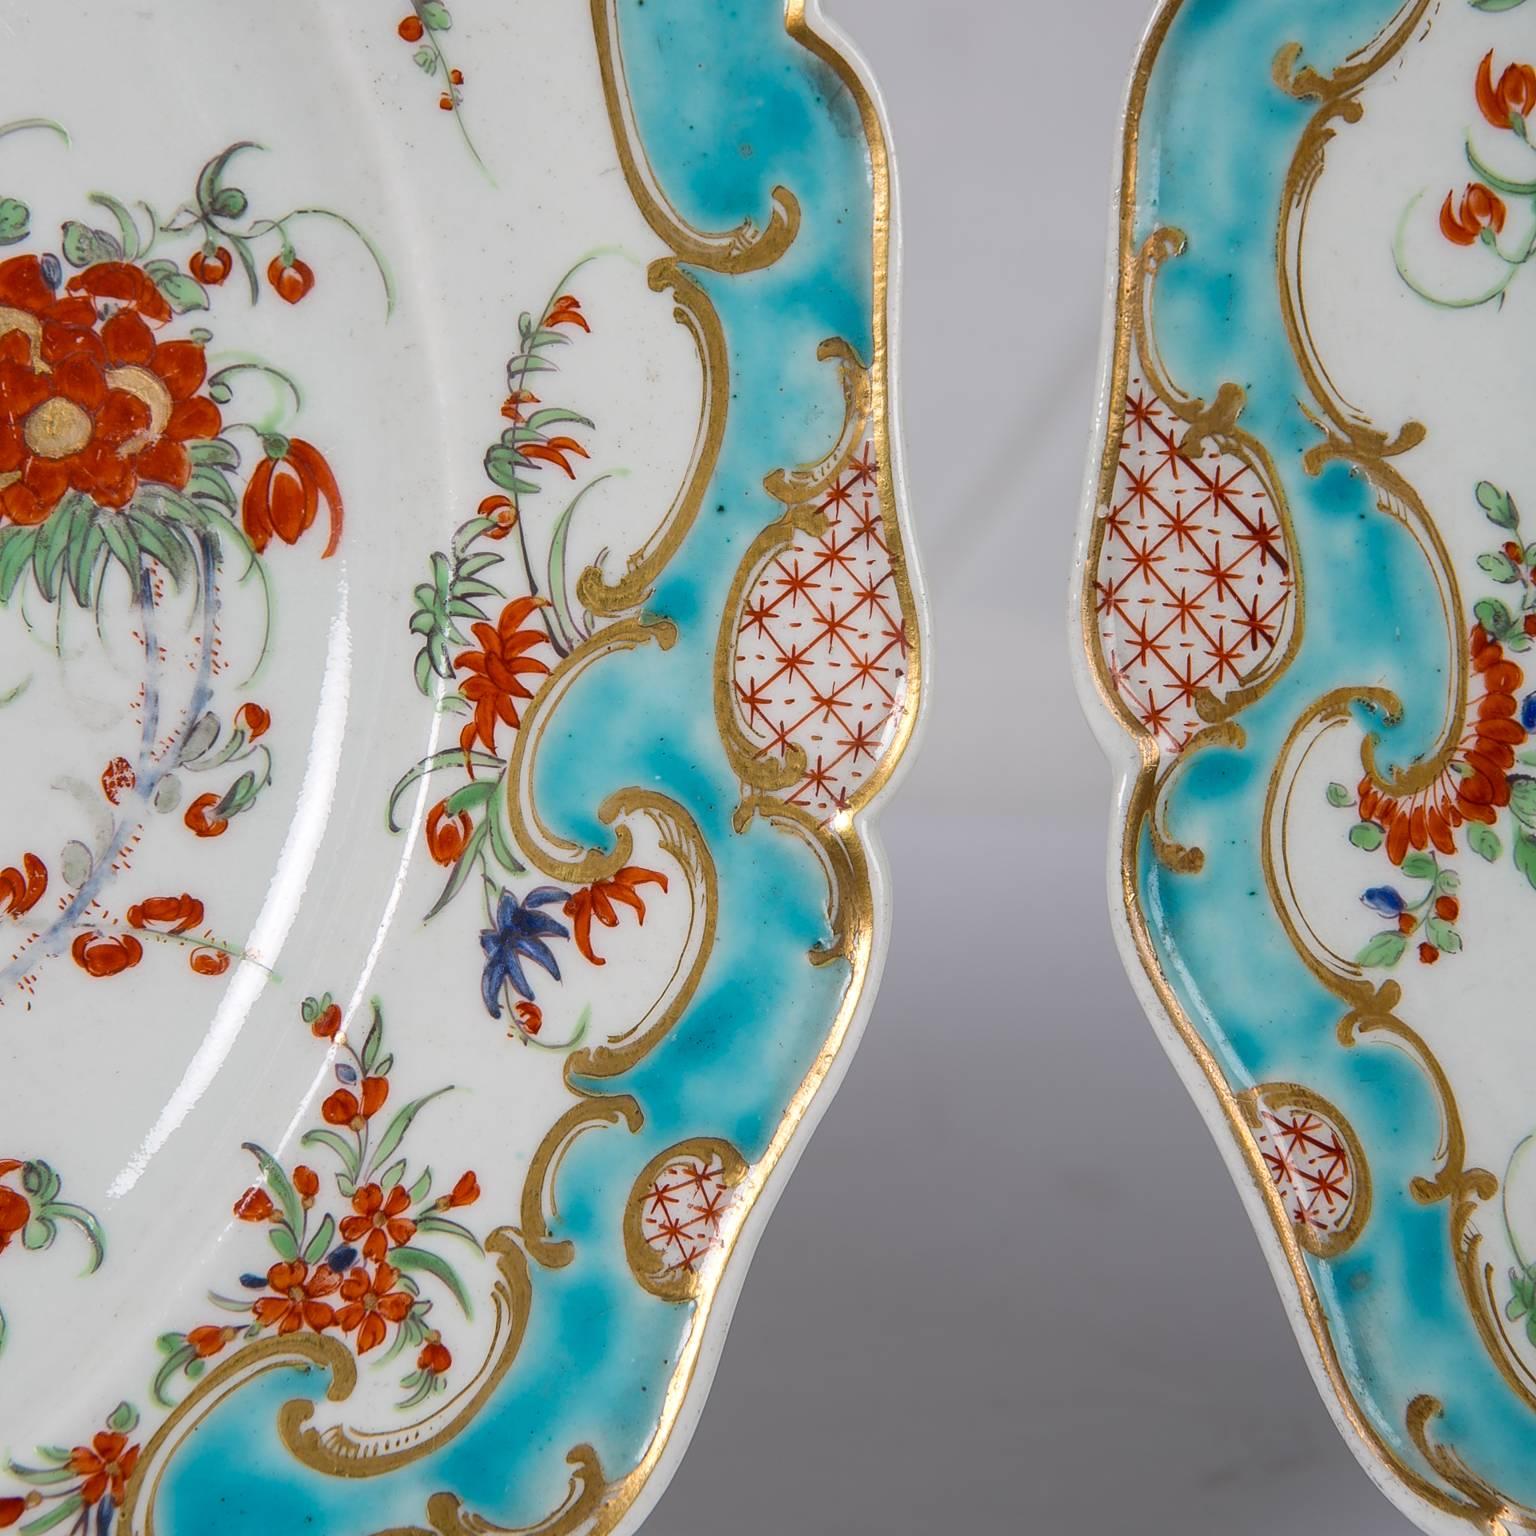 Hand-Painted First Period Worcester Porcelain Dishes a Pair in the Jabberwocky Pattern